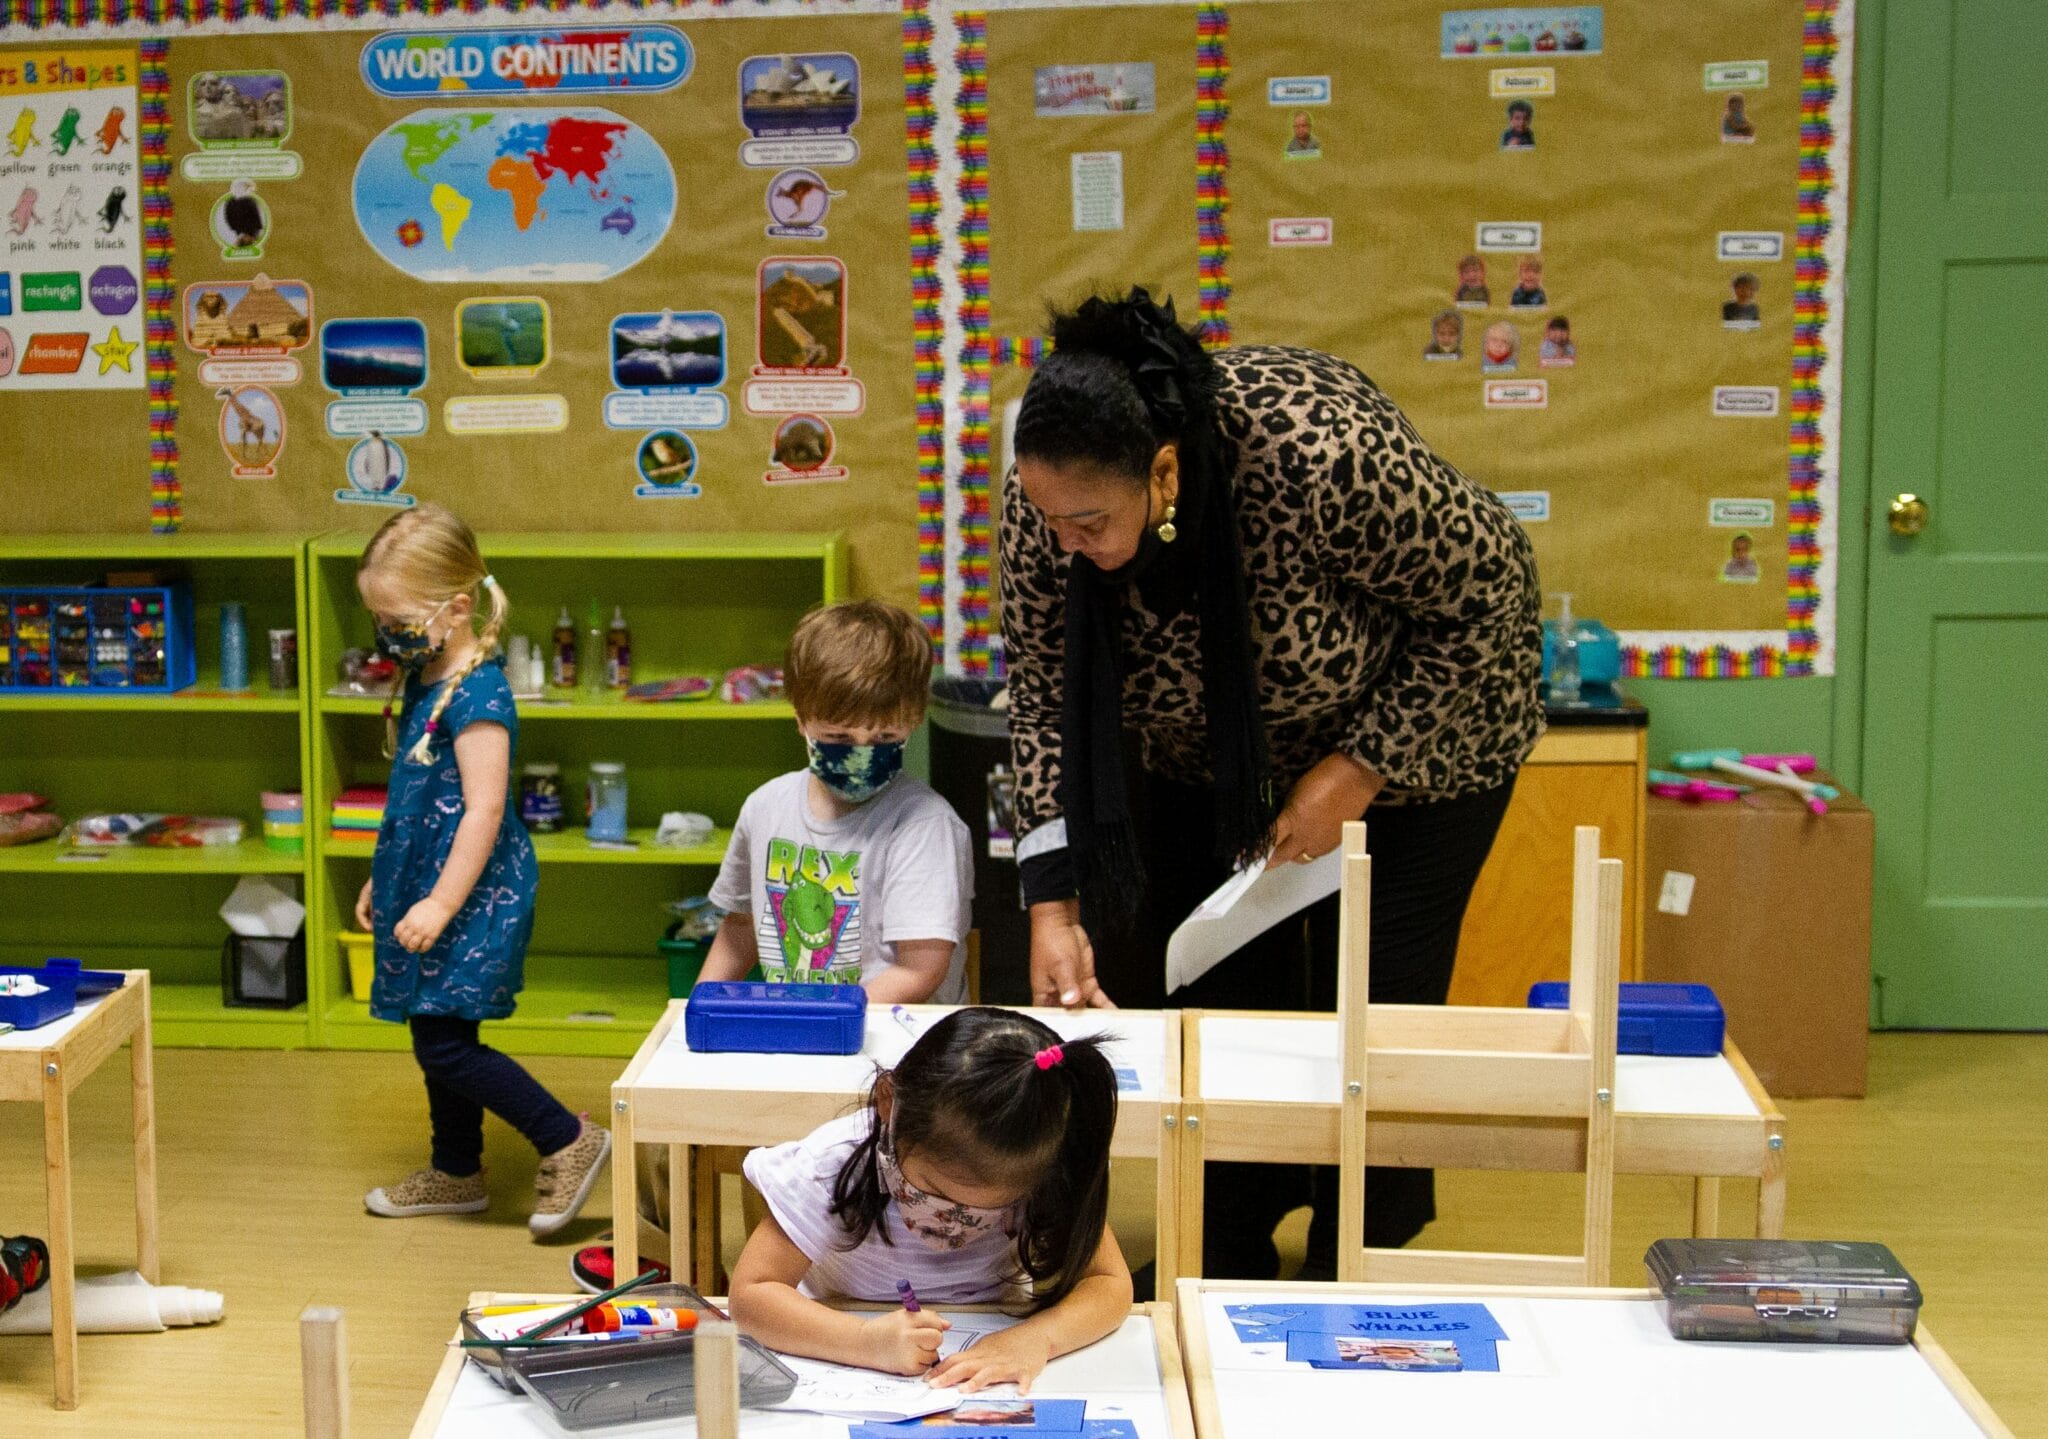 A Black preschool teacher assists a child with their drawing.